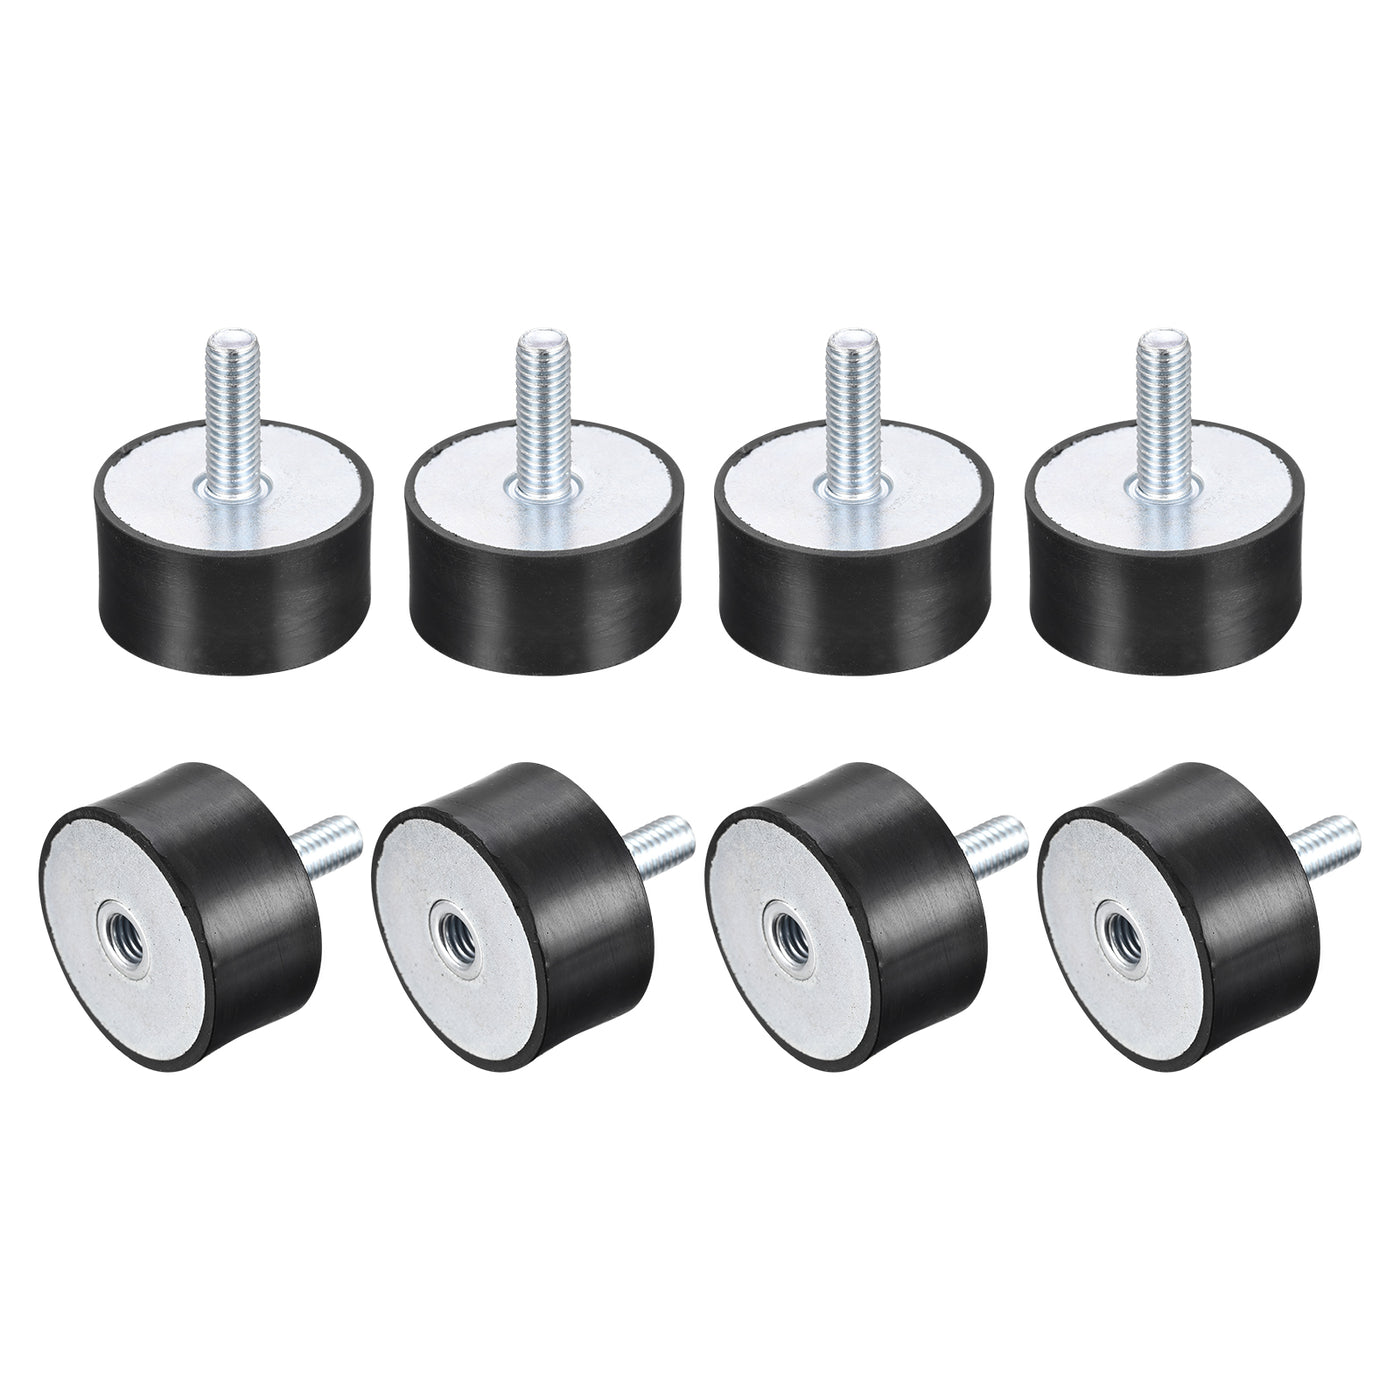 uxcell Uxcell Rubber Mounts 8pcs M8 Male/Female Vibration Isolator Shock Absorber D40mmxH20mm